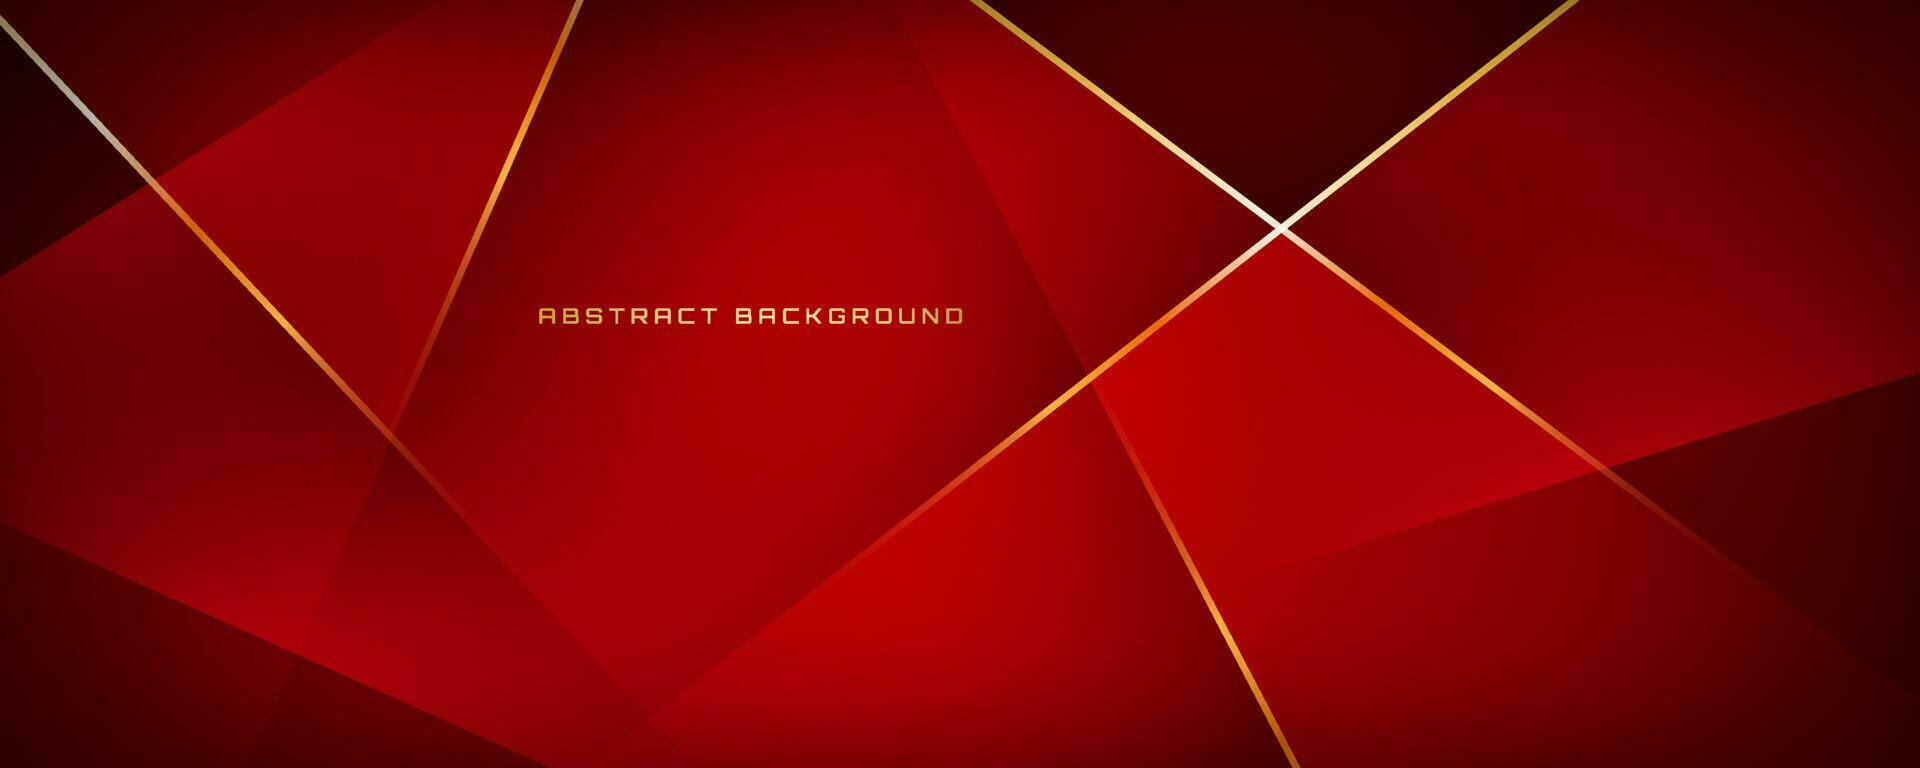 3D red luxury abstract background overlap layer on dark space with golden polygonal lines decoration. Modern graphic design element cutout style concept for banner, flyer, card, or brochure cover vector